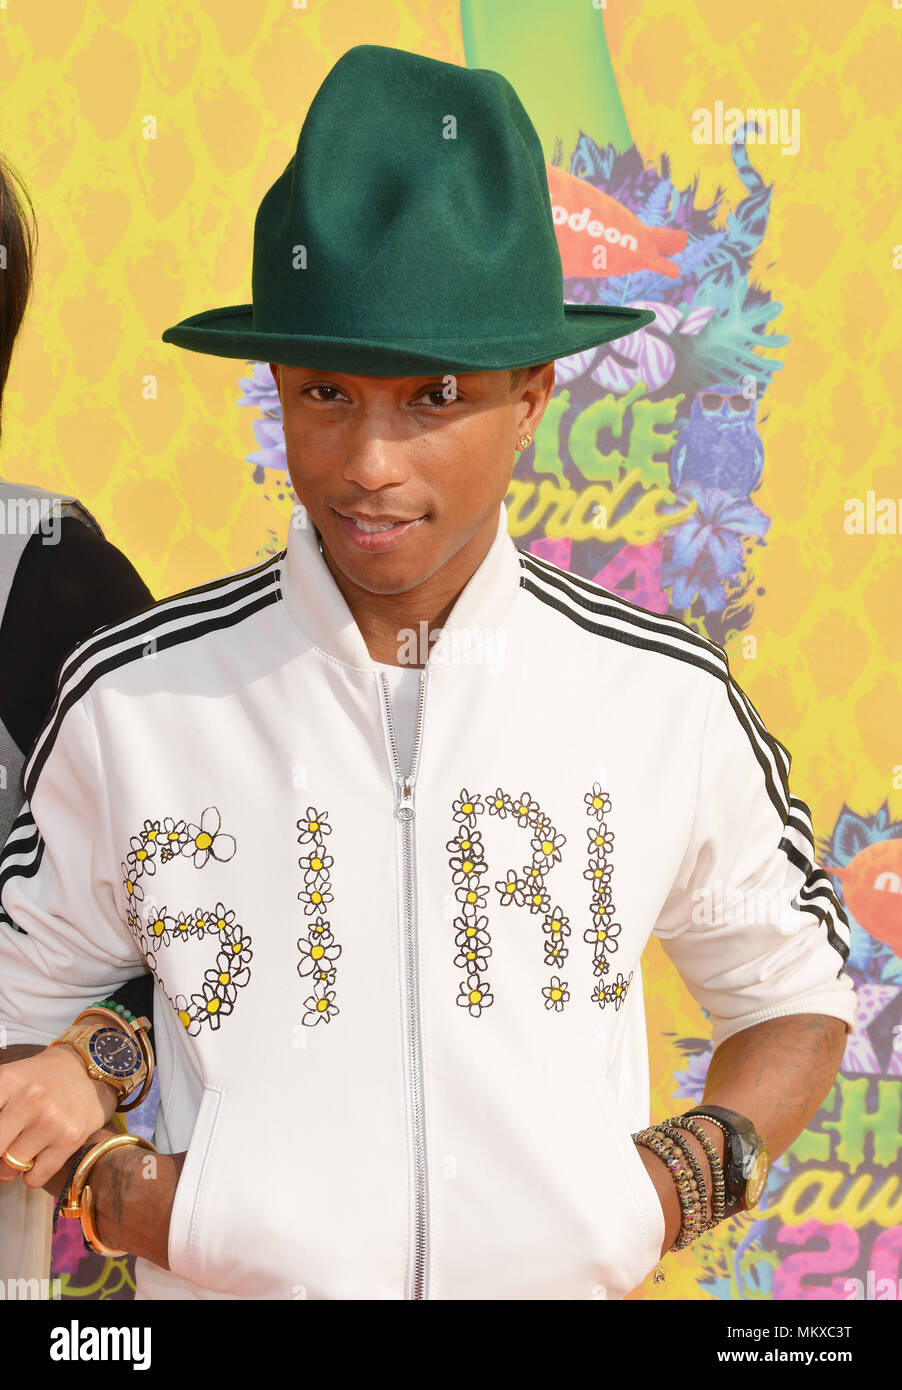 Pharrell Williams  at the NickelOdeon's 27th Annual Kids Choice Awards 2014 at the Gallen Center in Los Angeles.Pharrell Williams  Red Carpet Event, Vertical, USA, Film Industry, Celebrities,  Photography, Bestof, Arts Culture and Entertainment, Topix Celebrities fashion /  Vertical, Best of, Event in Hollywood Life - California,  Red Carpet and backstage, USA, Film Industry, Celebrities,  movie celebrities, TV celebrities, Music celebrities, Photography, Bestof, Arts Culture and Entertainment,  Topix, headshot, vertical, one person,, from the year , 2014, inquiry tsuni@Gamma-USA.com Stock Photo